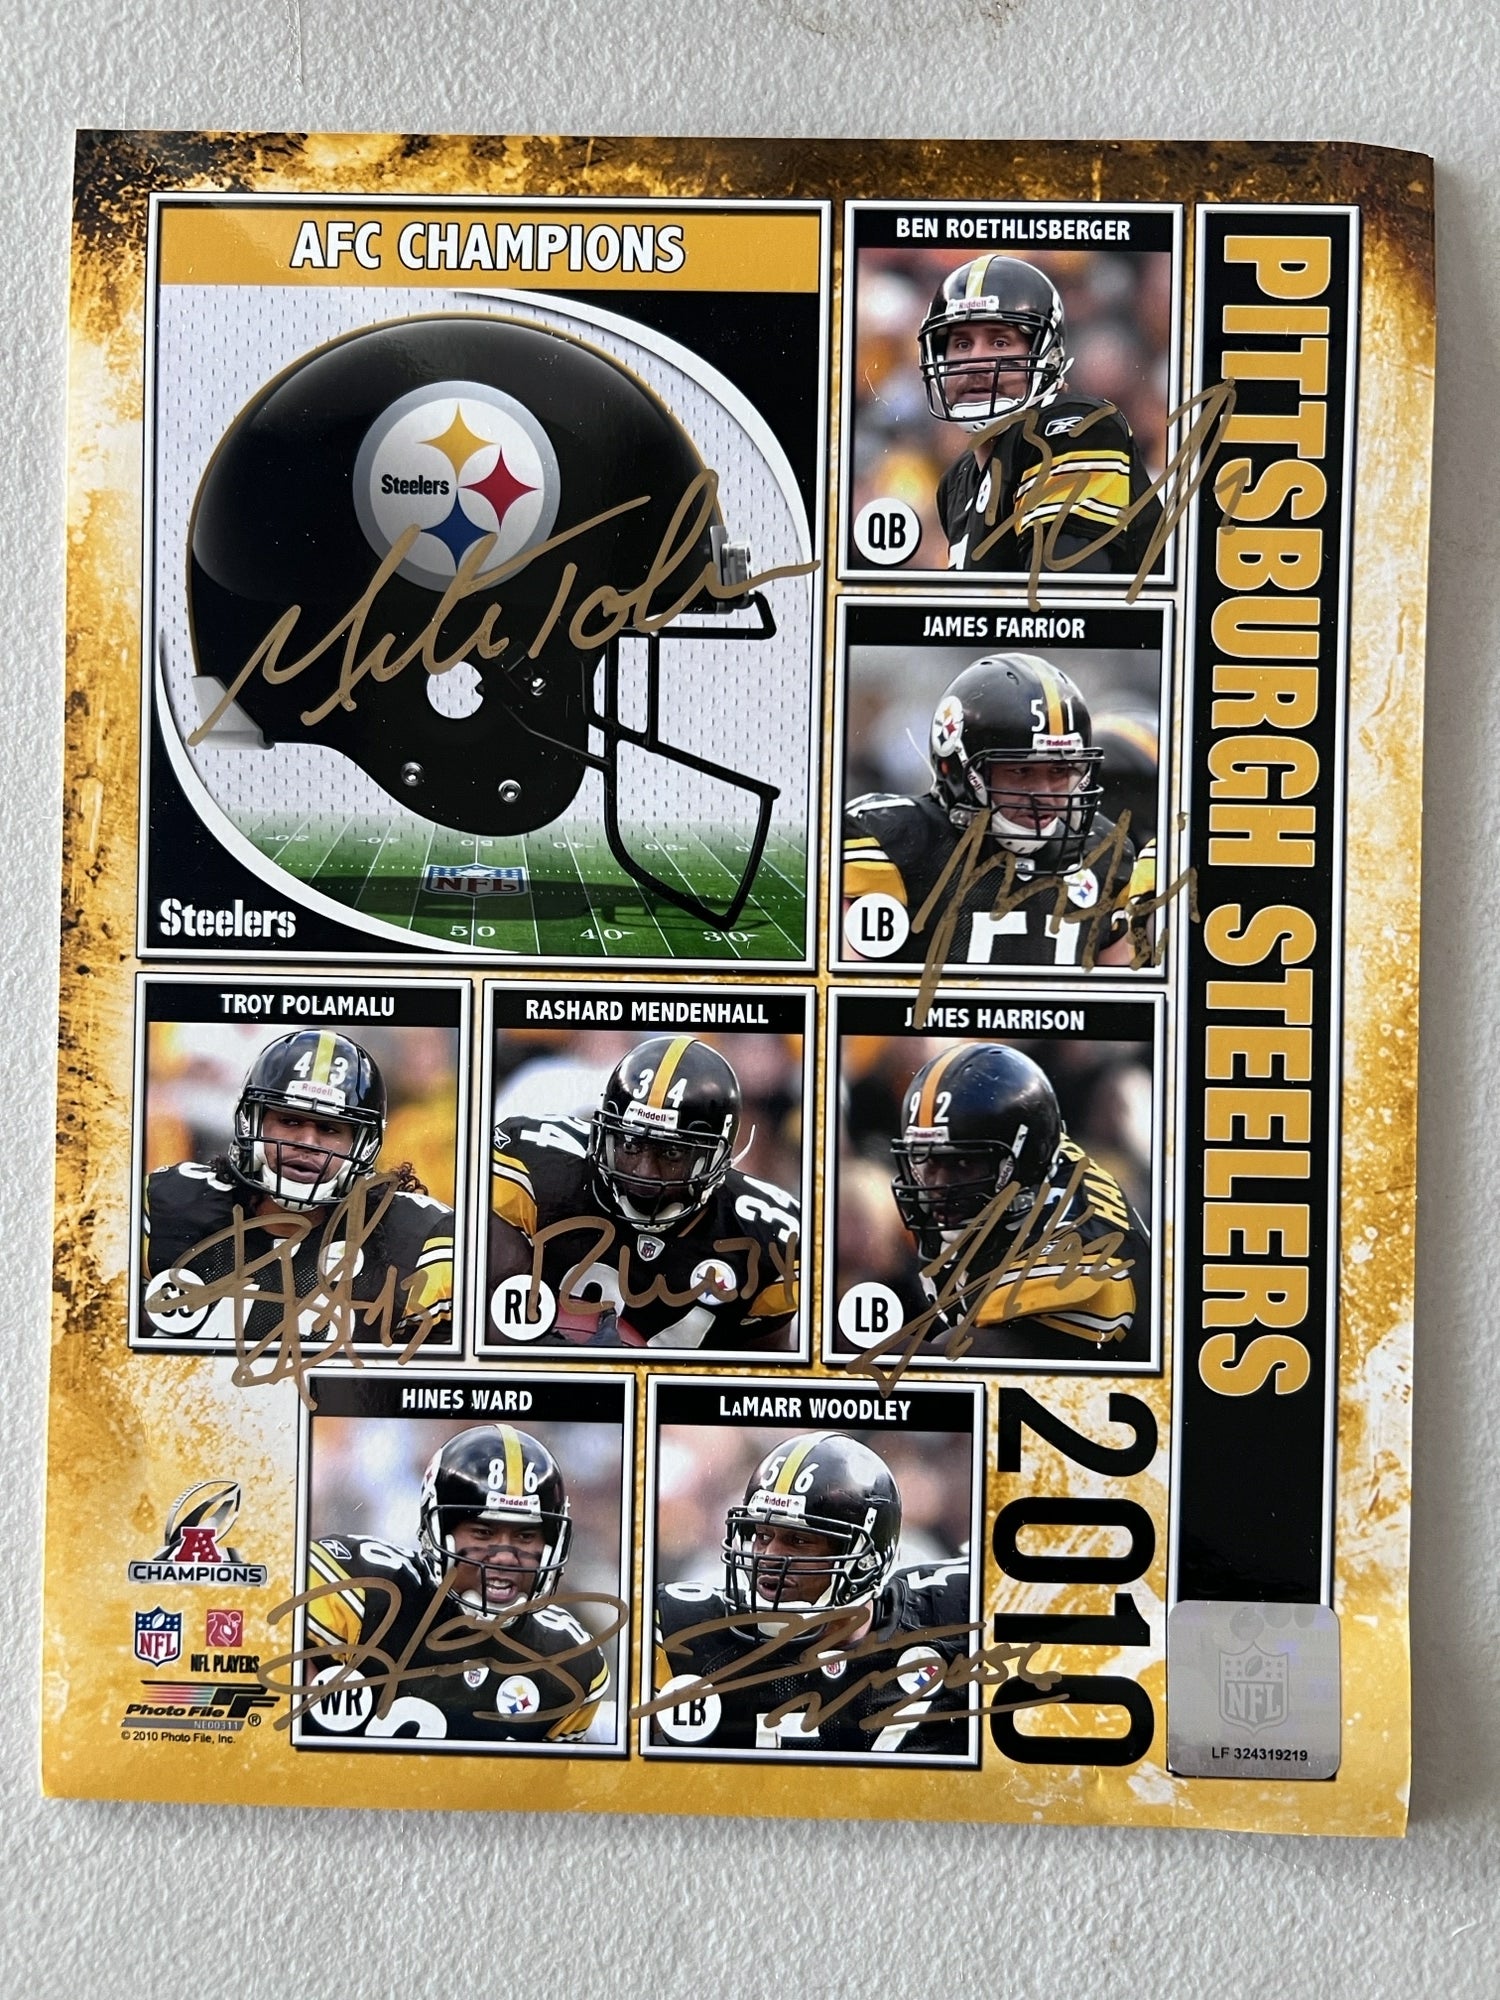 Pittsburgh Steelers Mike Tomlin, Ben Roethlisberger, Troy Polamalu, Hines Ward 8x10 photo signed with proof